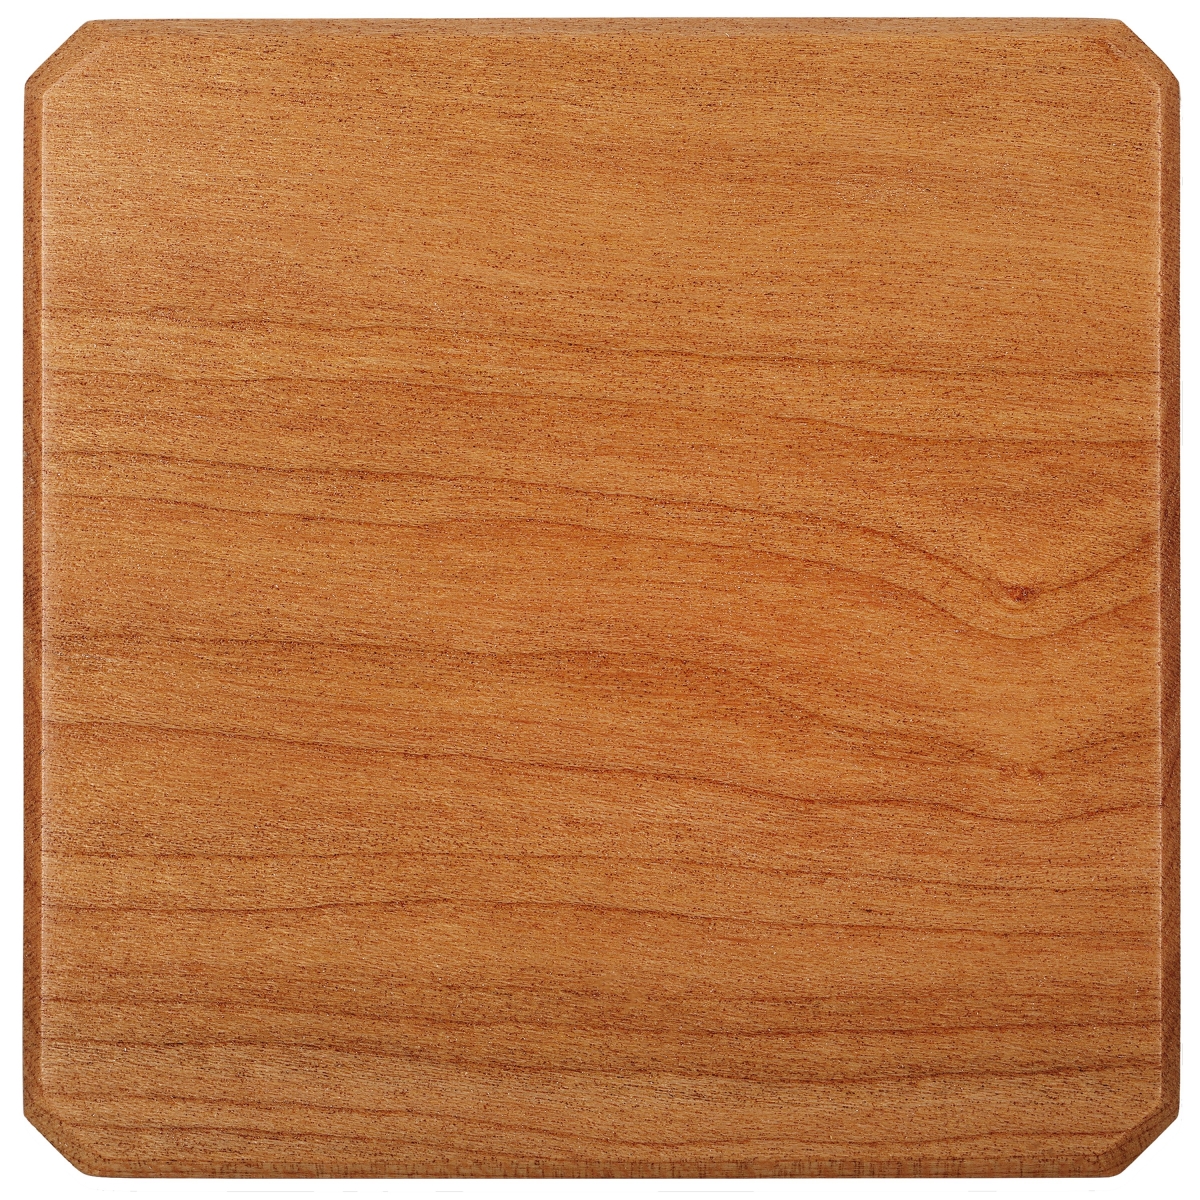 Picture of A & E Millwork AEM-5050 Single Tiger Wood Coasters